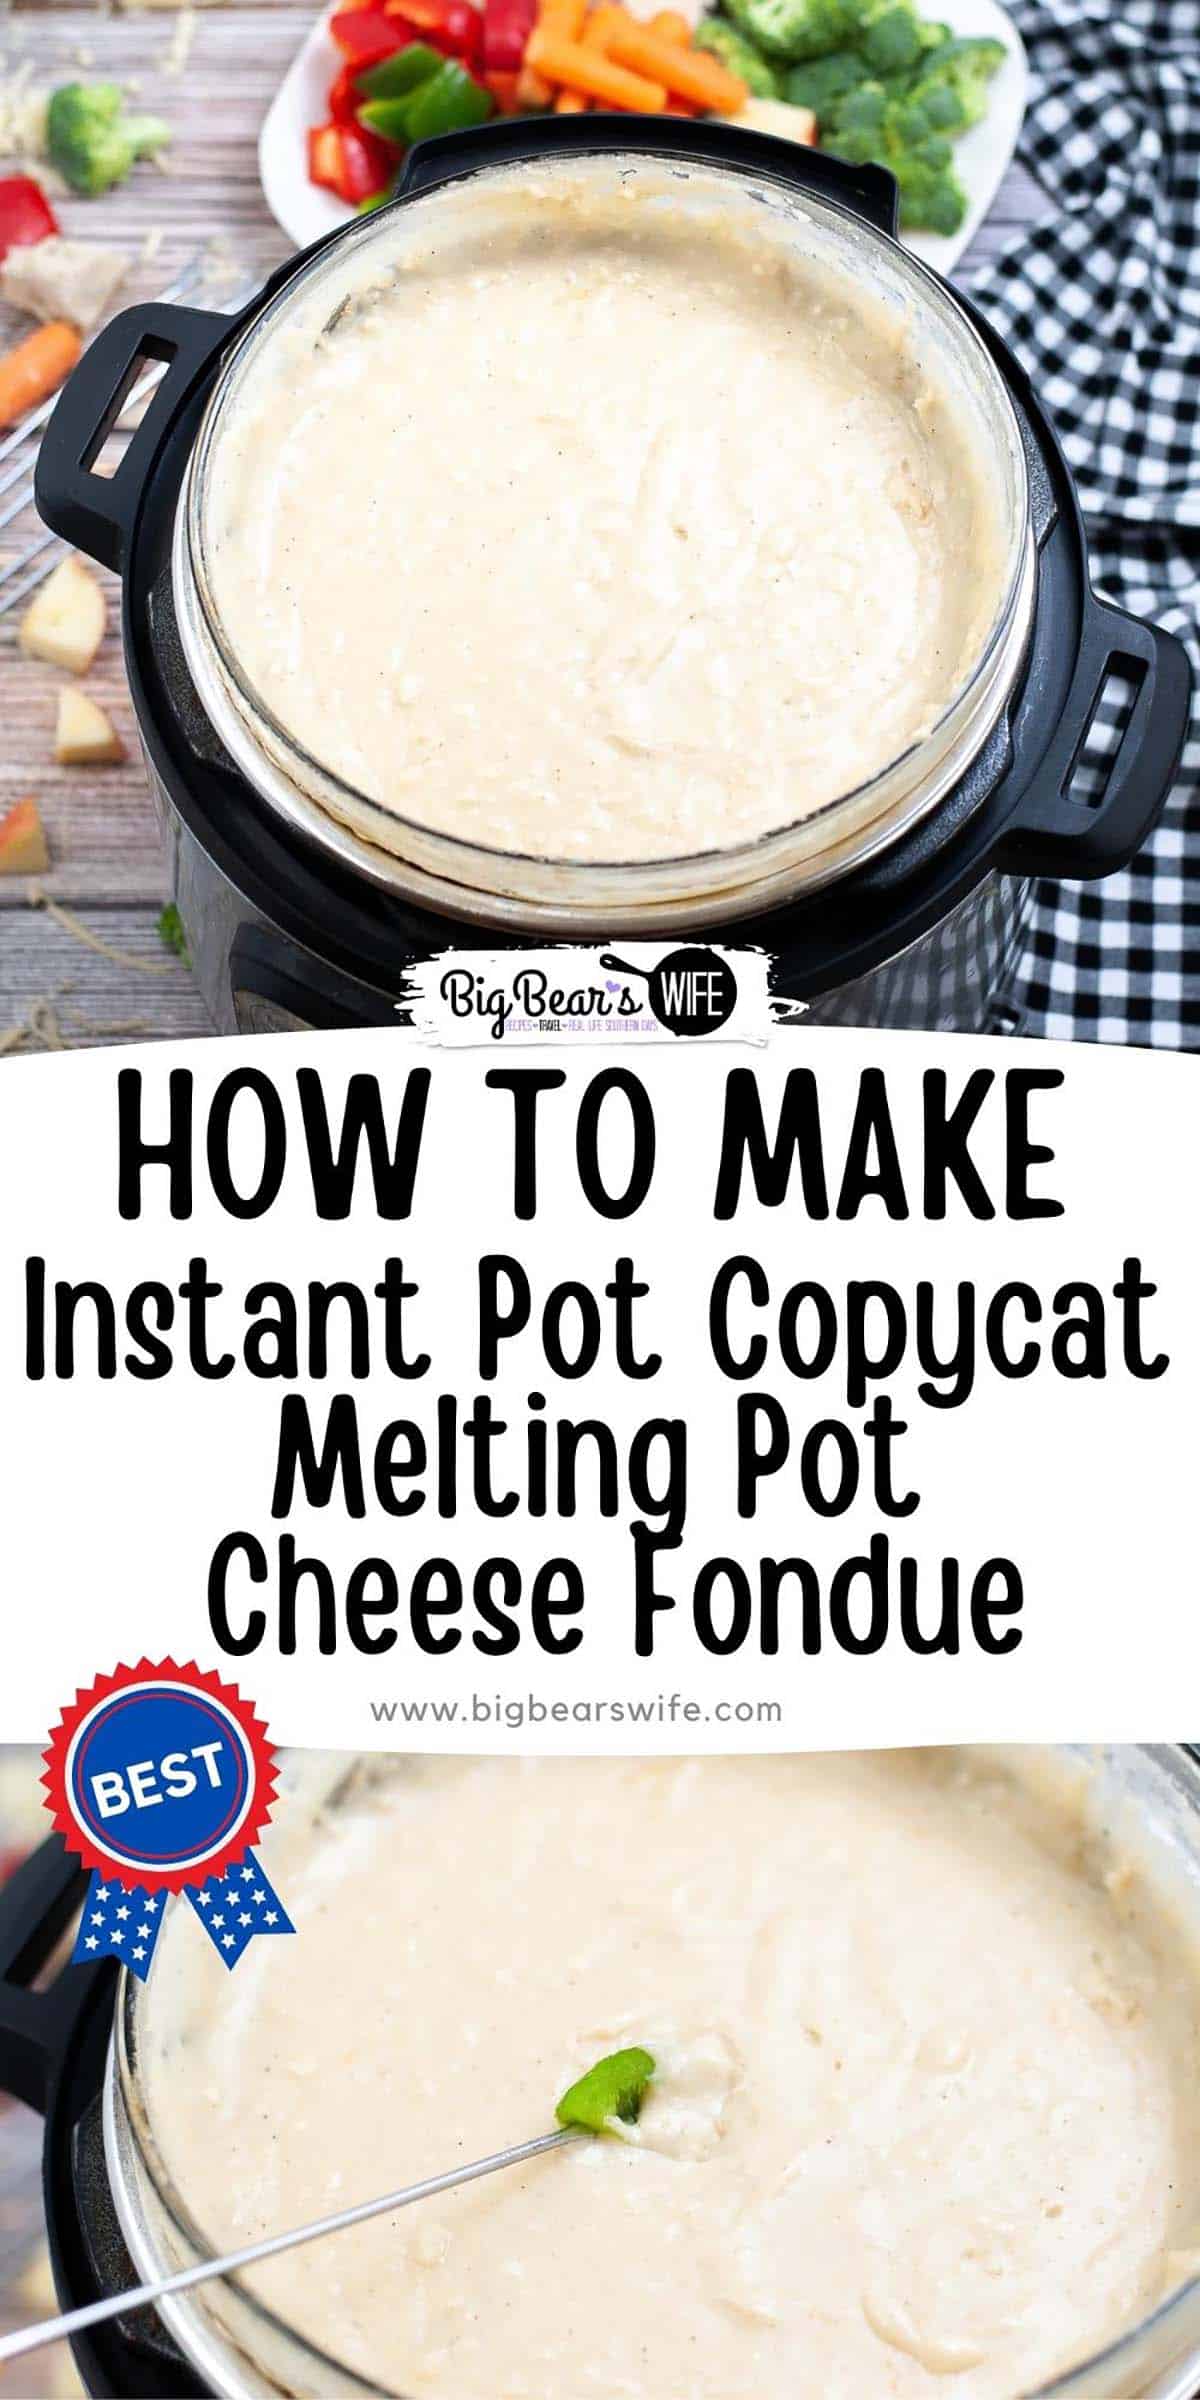 Ready for a fondue night at home? This Instant Pot Melting Pot inspired Cheese Fondue is ready in about 30 minutes and perfect for dipping breads, fruits and cooked meats! via @bigbearswife